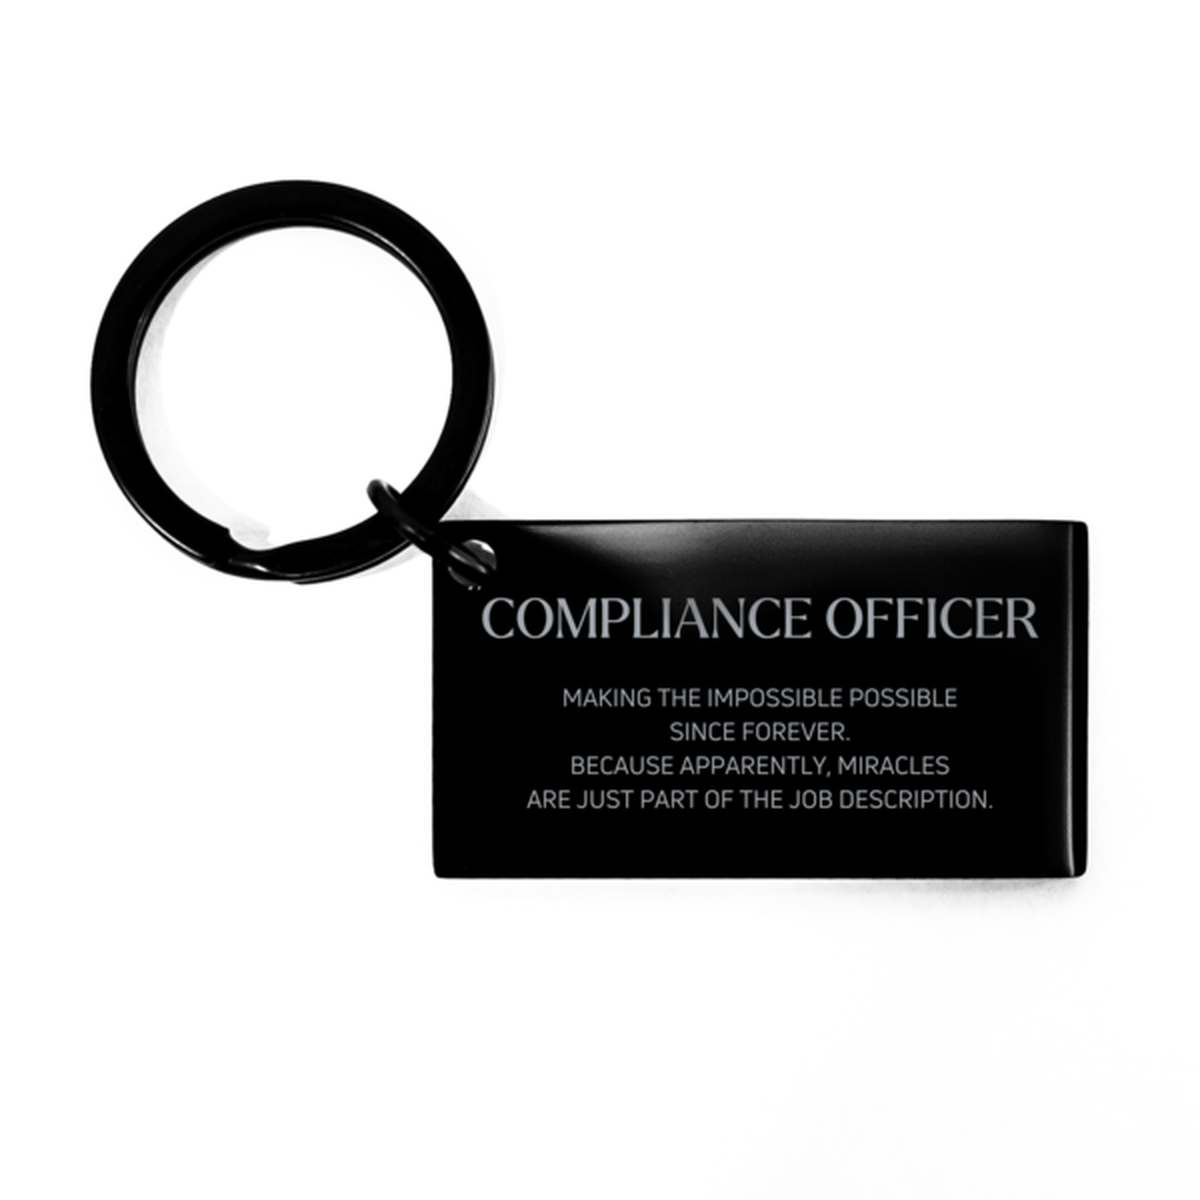 Funny Compliance Officer Gifts, Miracles are just part of the job description, Inspirational Birthday Keychain For Compliance Officer, Men, Women, Coworkers, Friends, Boss